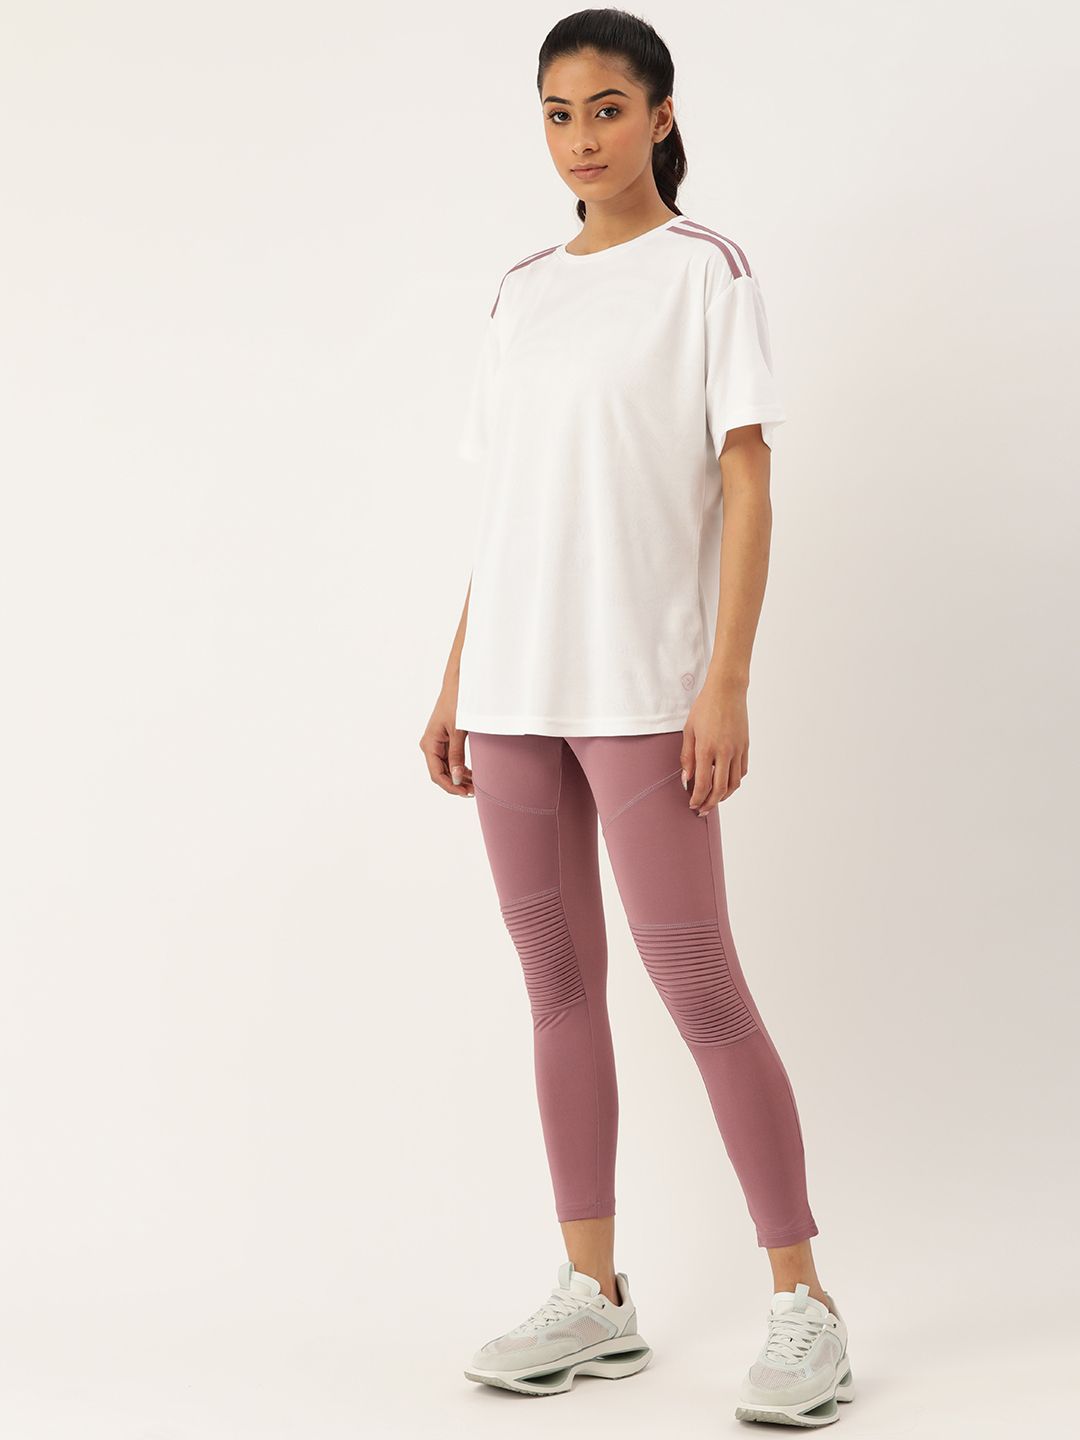 KICA Women White & Pink Top with High Waisted Ribbed Detailing Leggings Price in India